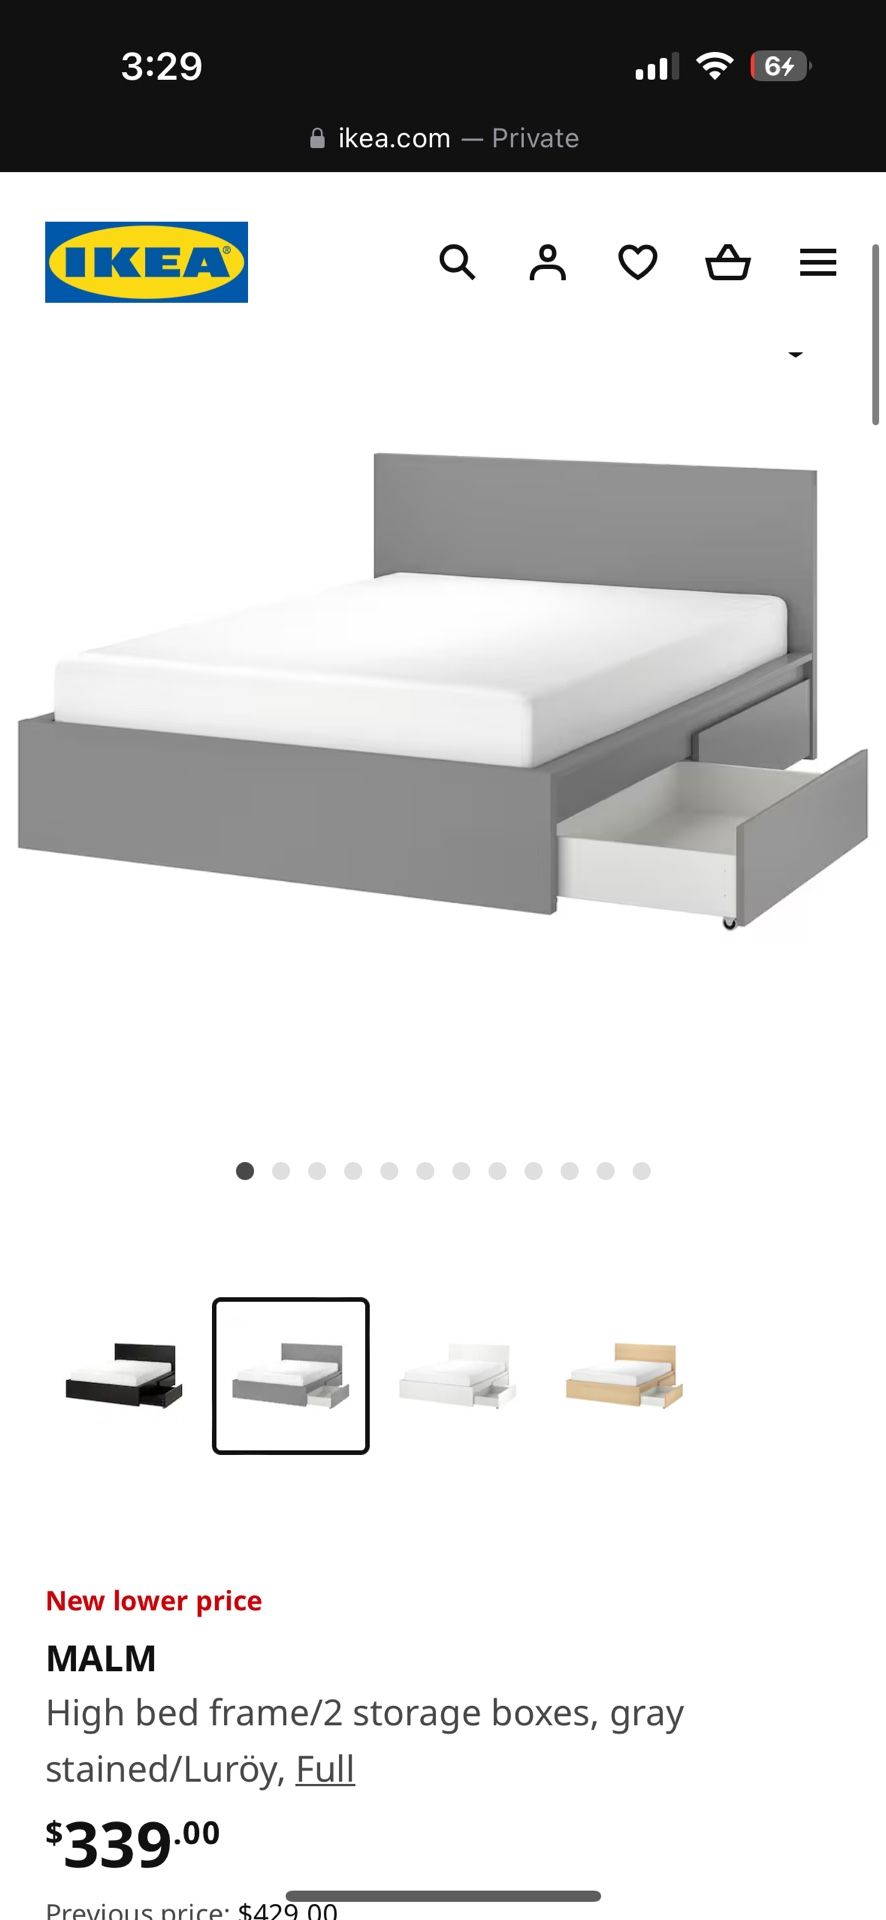 FULL Bed Frame With Storage Drawers (Grey)